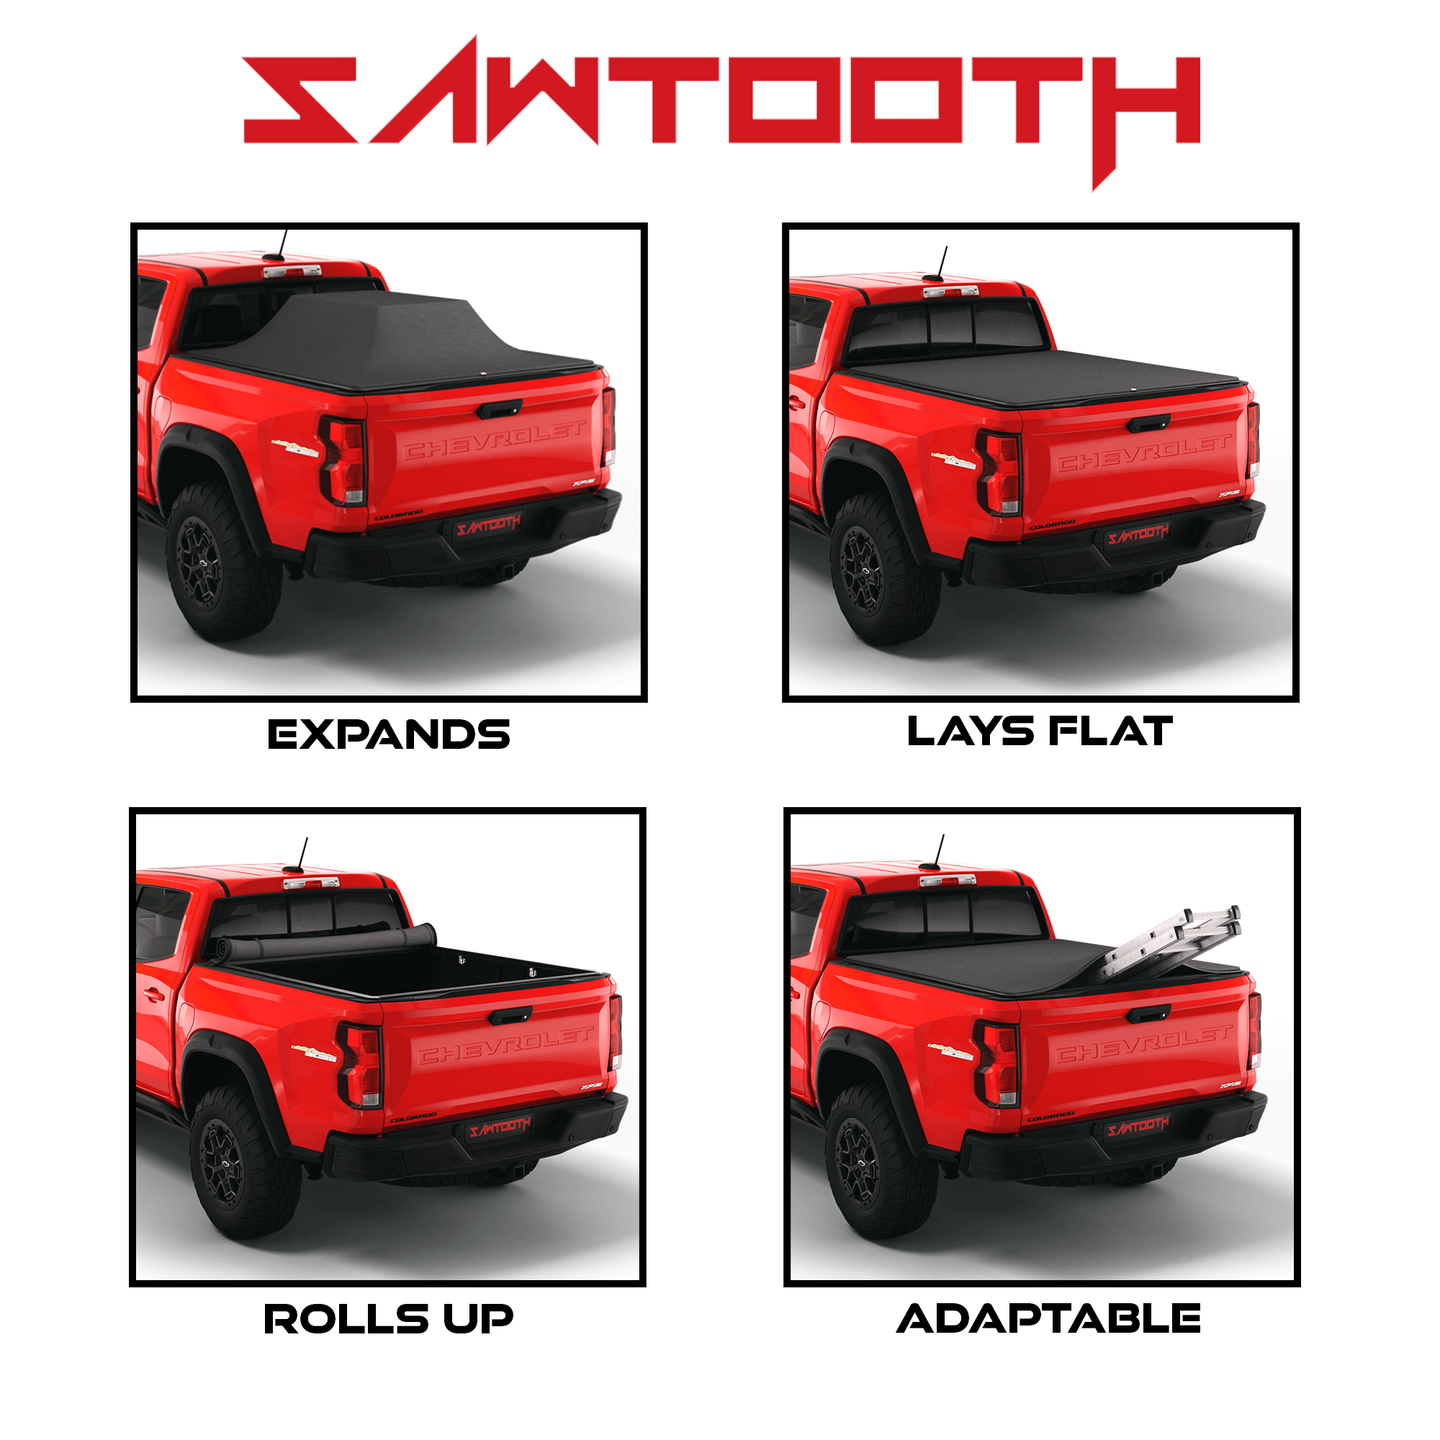 Sawtooth Stretch Expandable Truck Bed Cover Positions